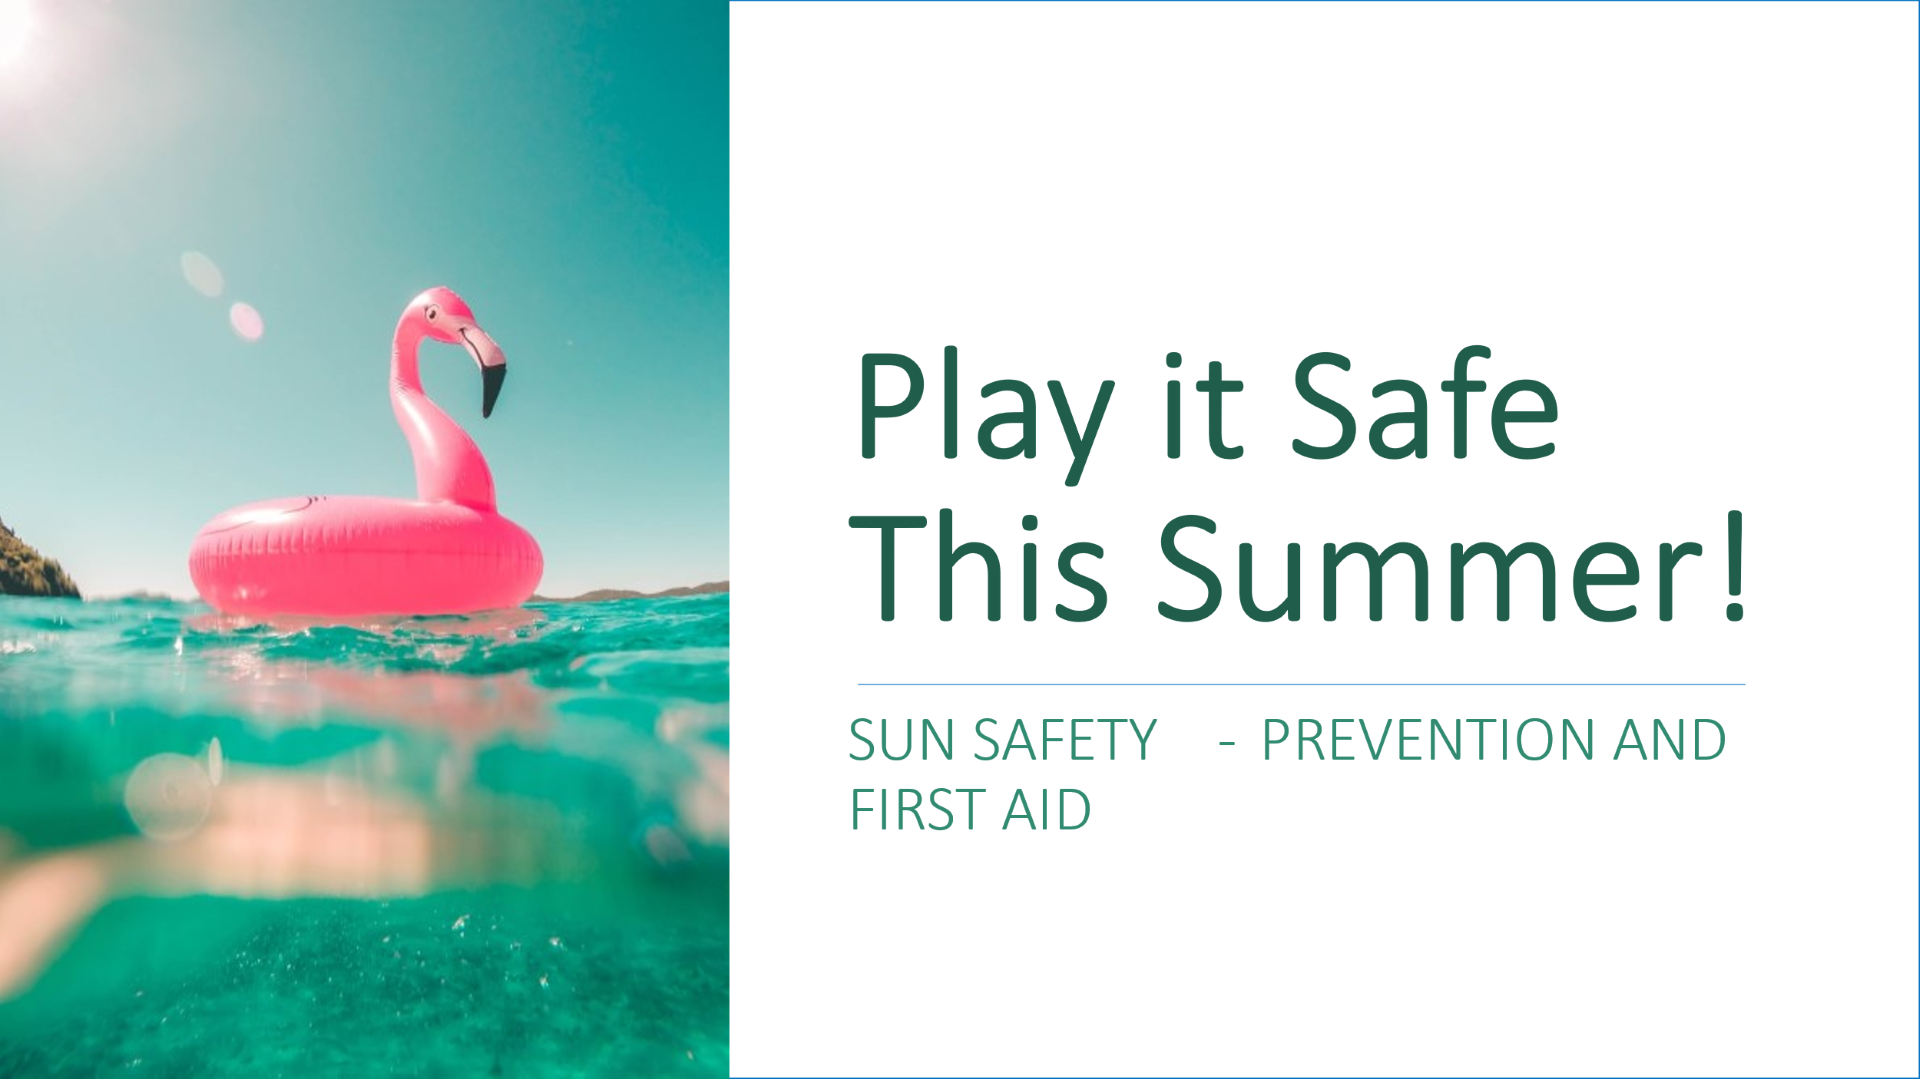 Play it Safe This Summer